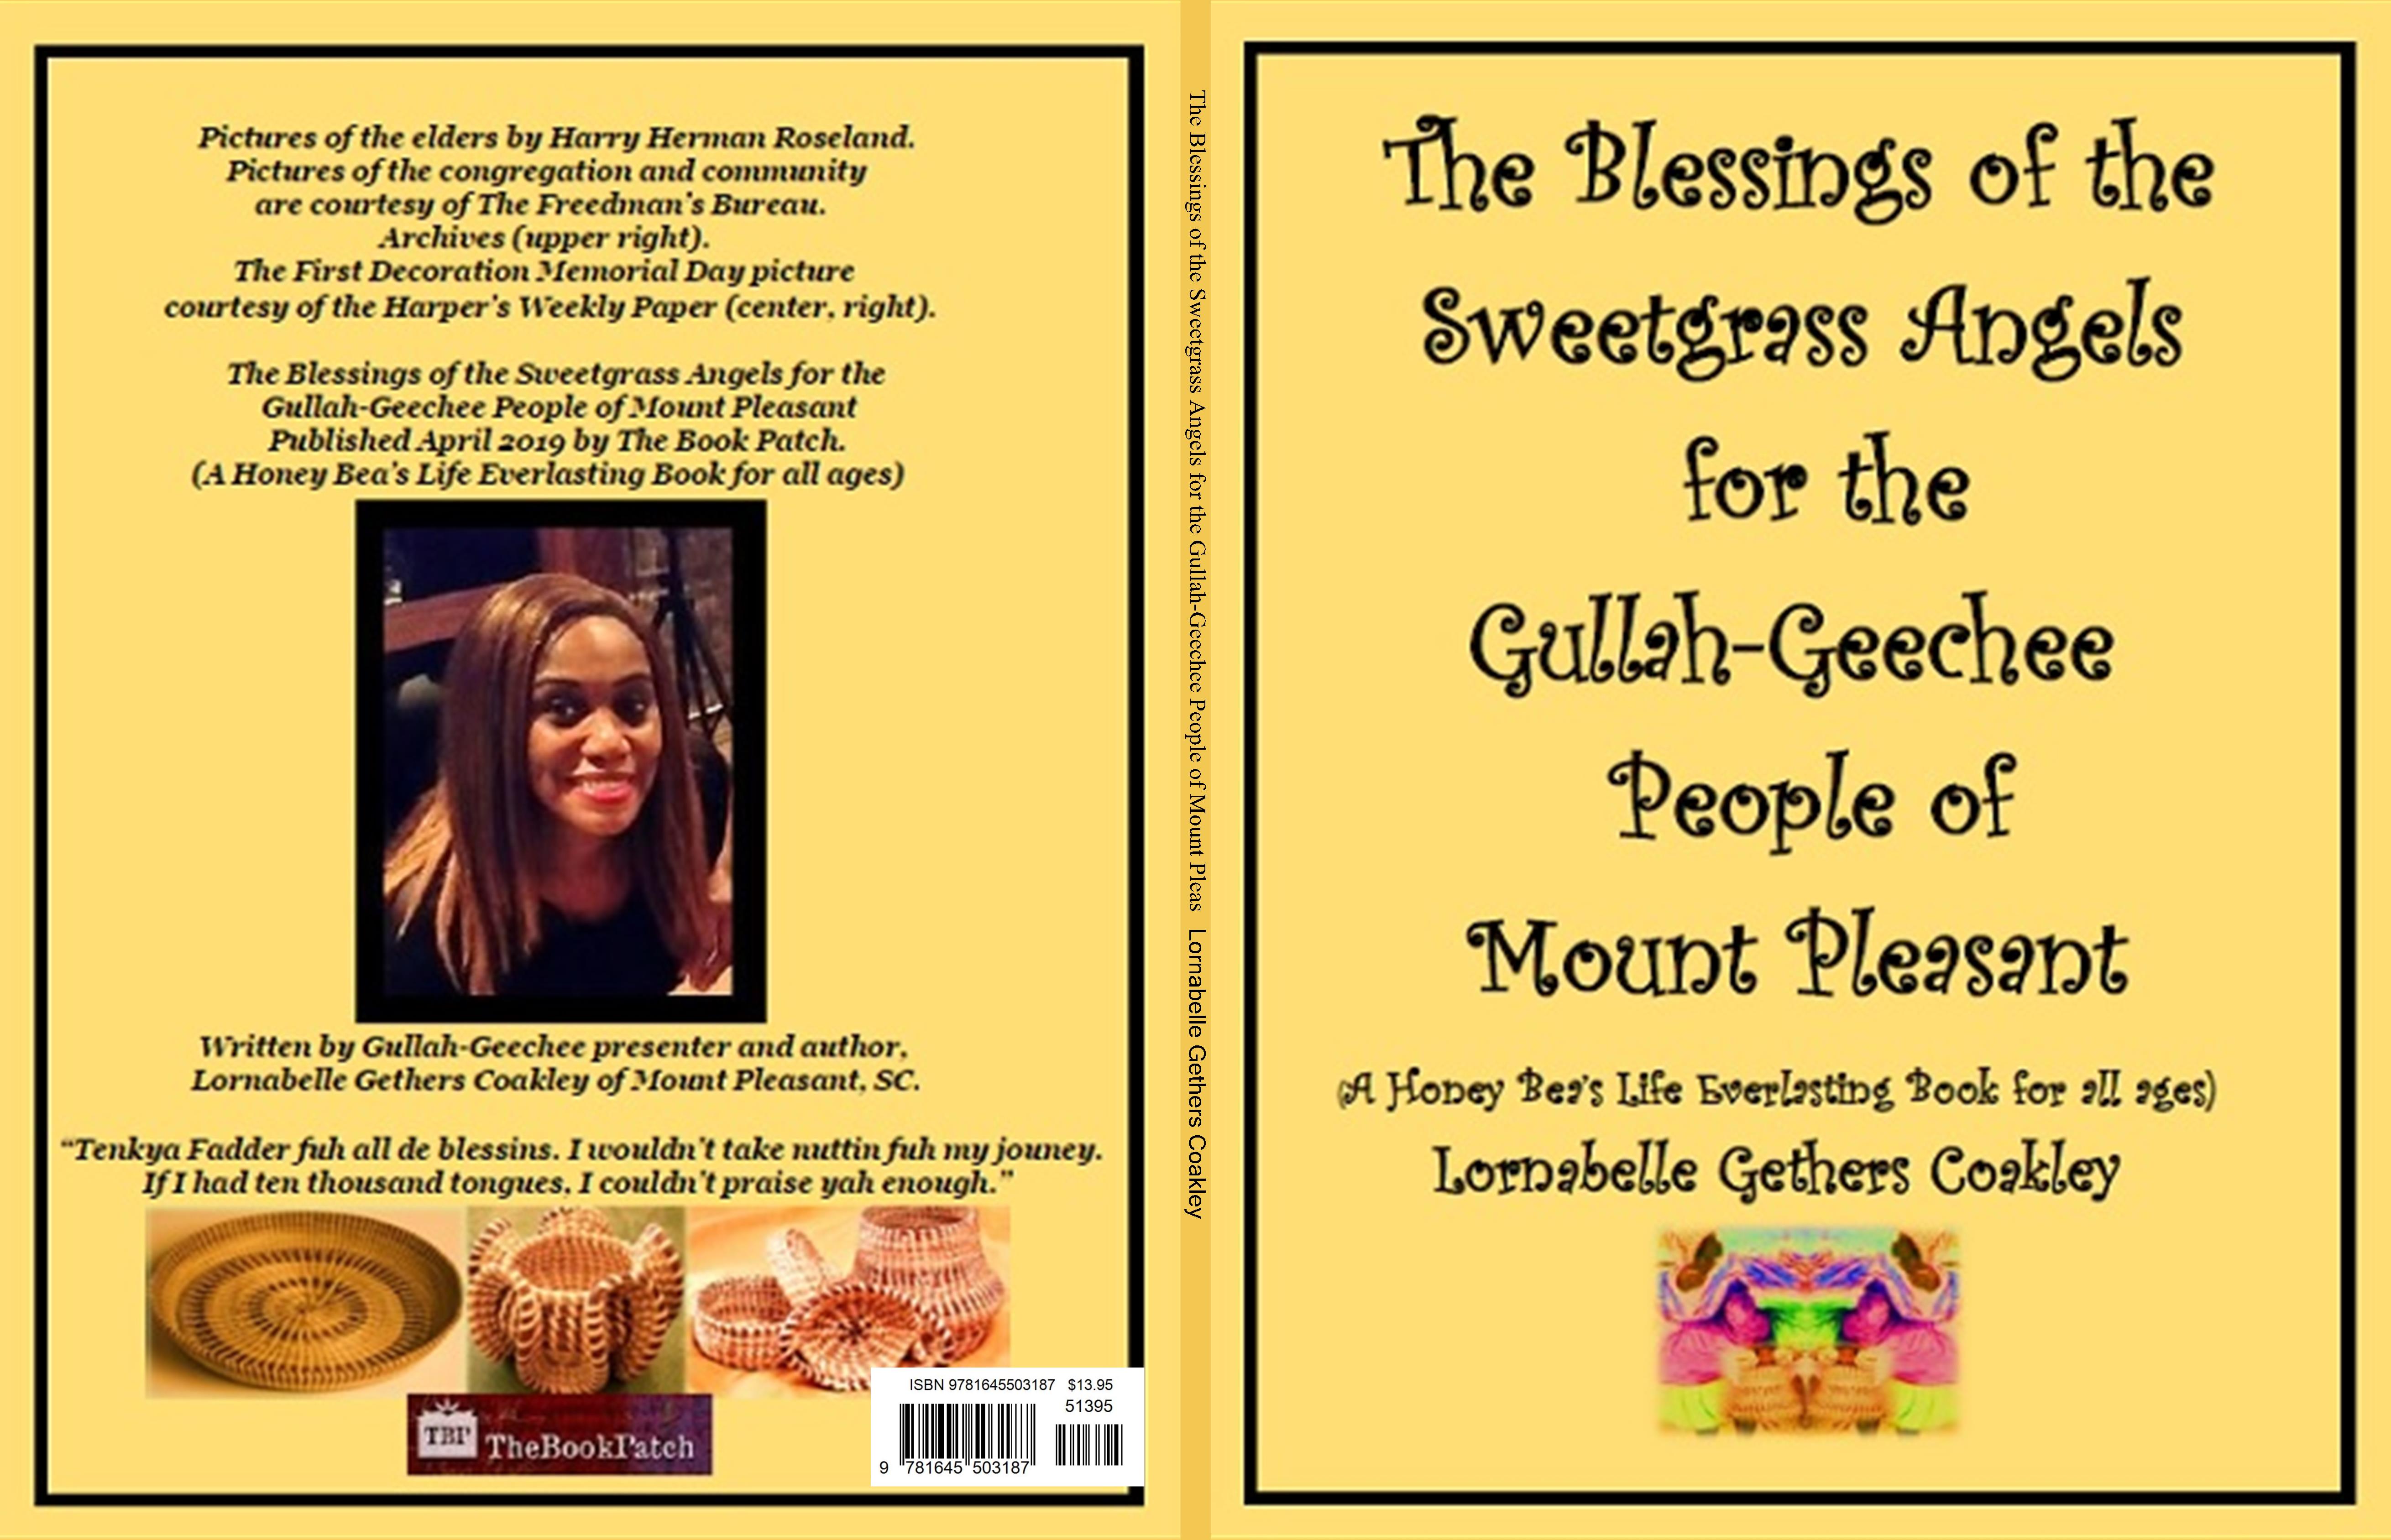 The Blessings of the Sweetgrass Angels for the Gullah-Geechee People of Mount Pleasant cover image